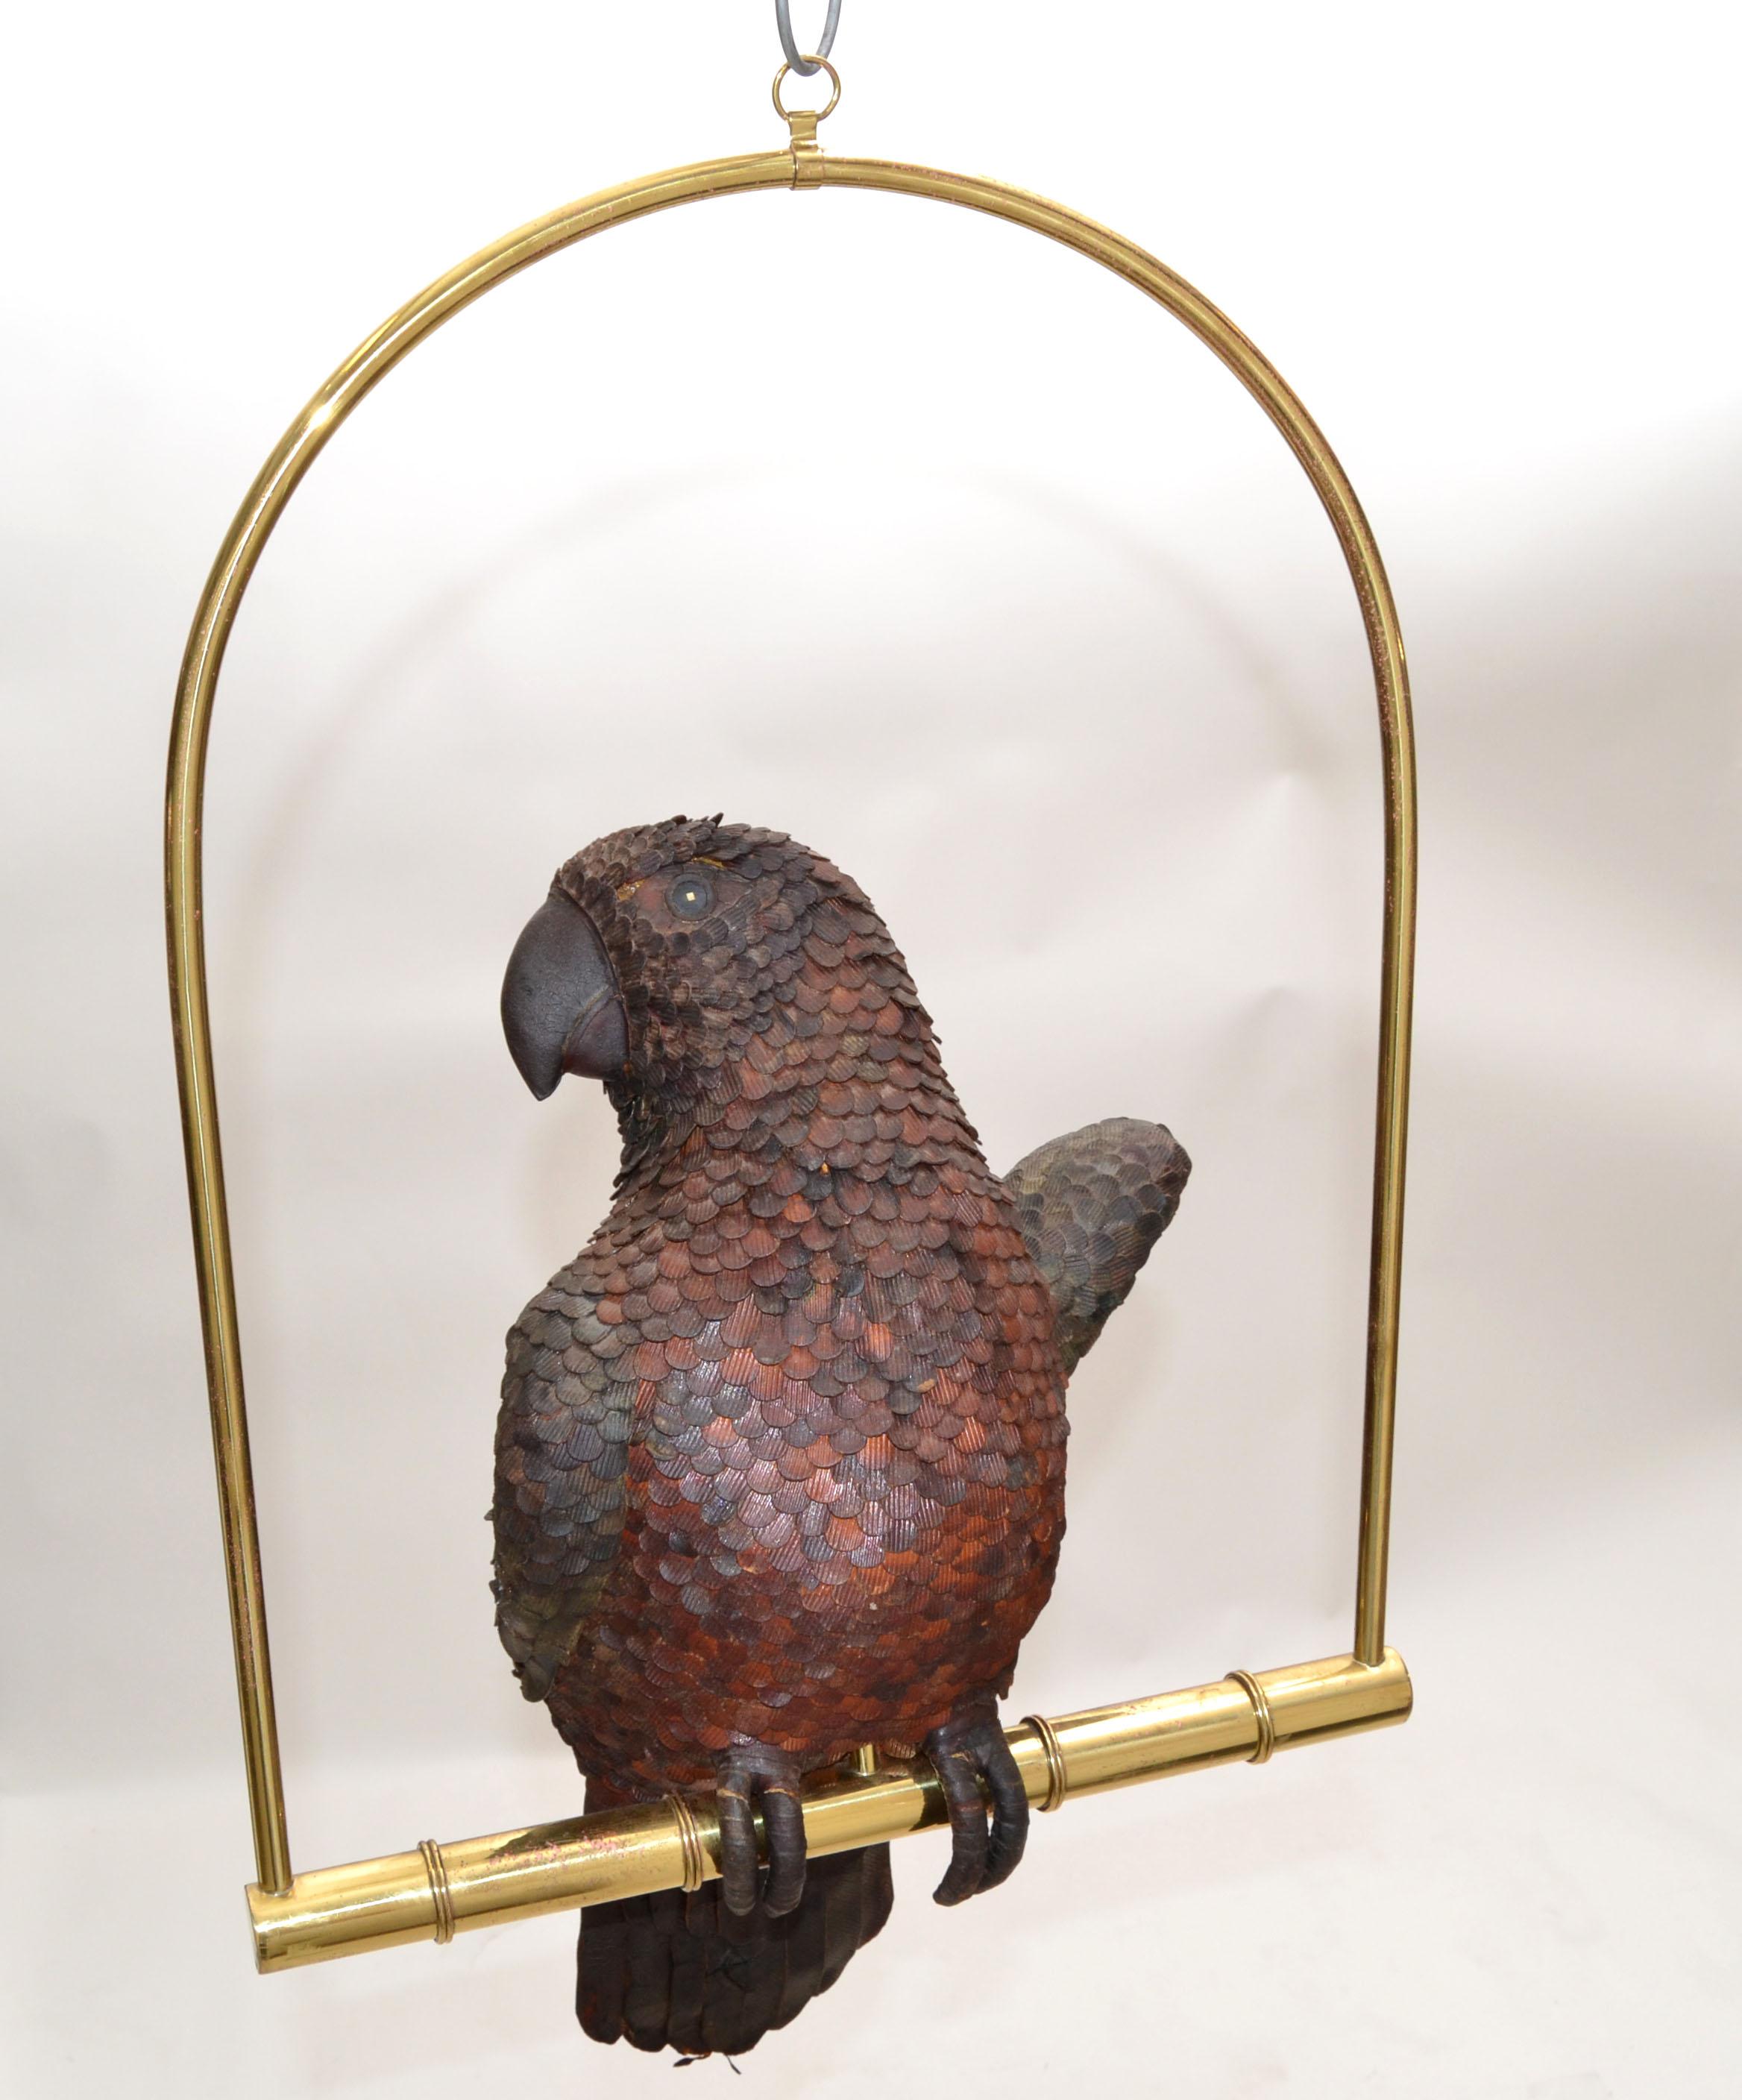 Signed 'FEDERICO in Mexico' leather parrot on a brass swing hand-crafted.
Beautiful animal sculpture.
Swing measurements: 19 inches height x 14 inches wide.
Parrot 17 inches Height.
Parrot with the swing 25 inches height.